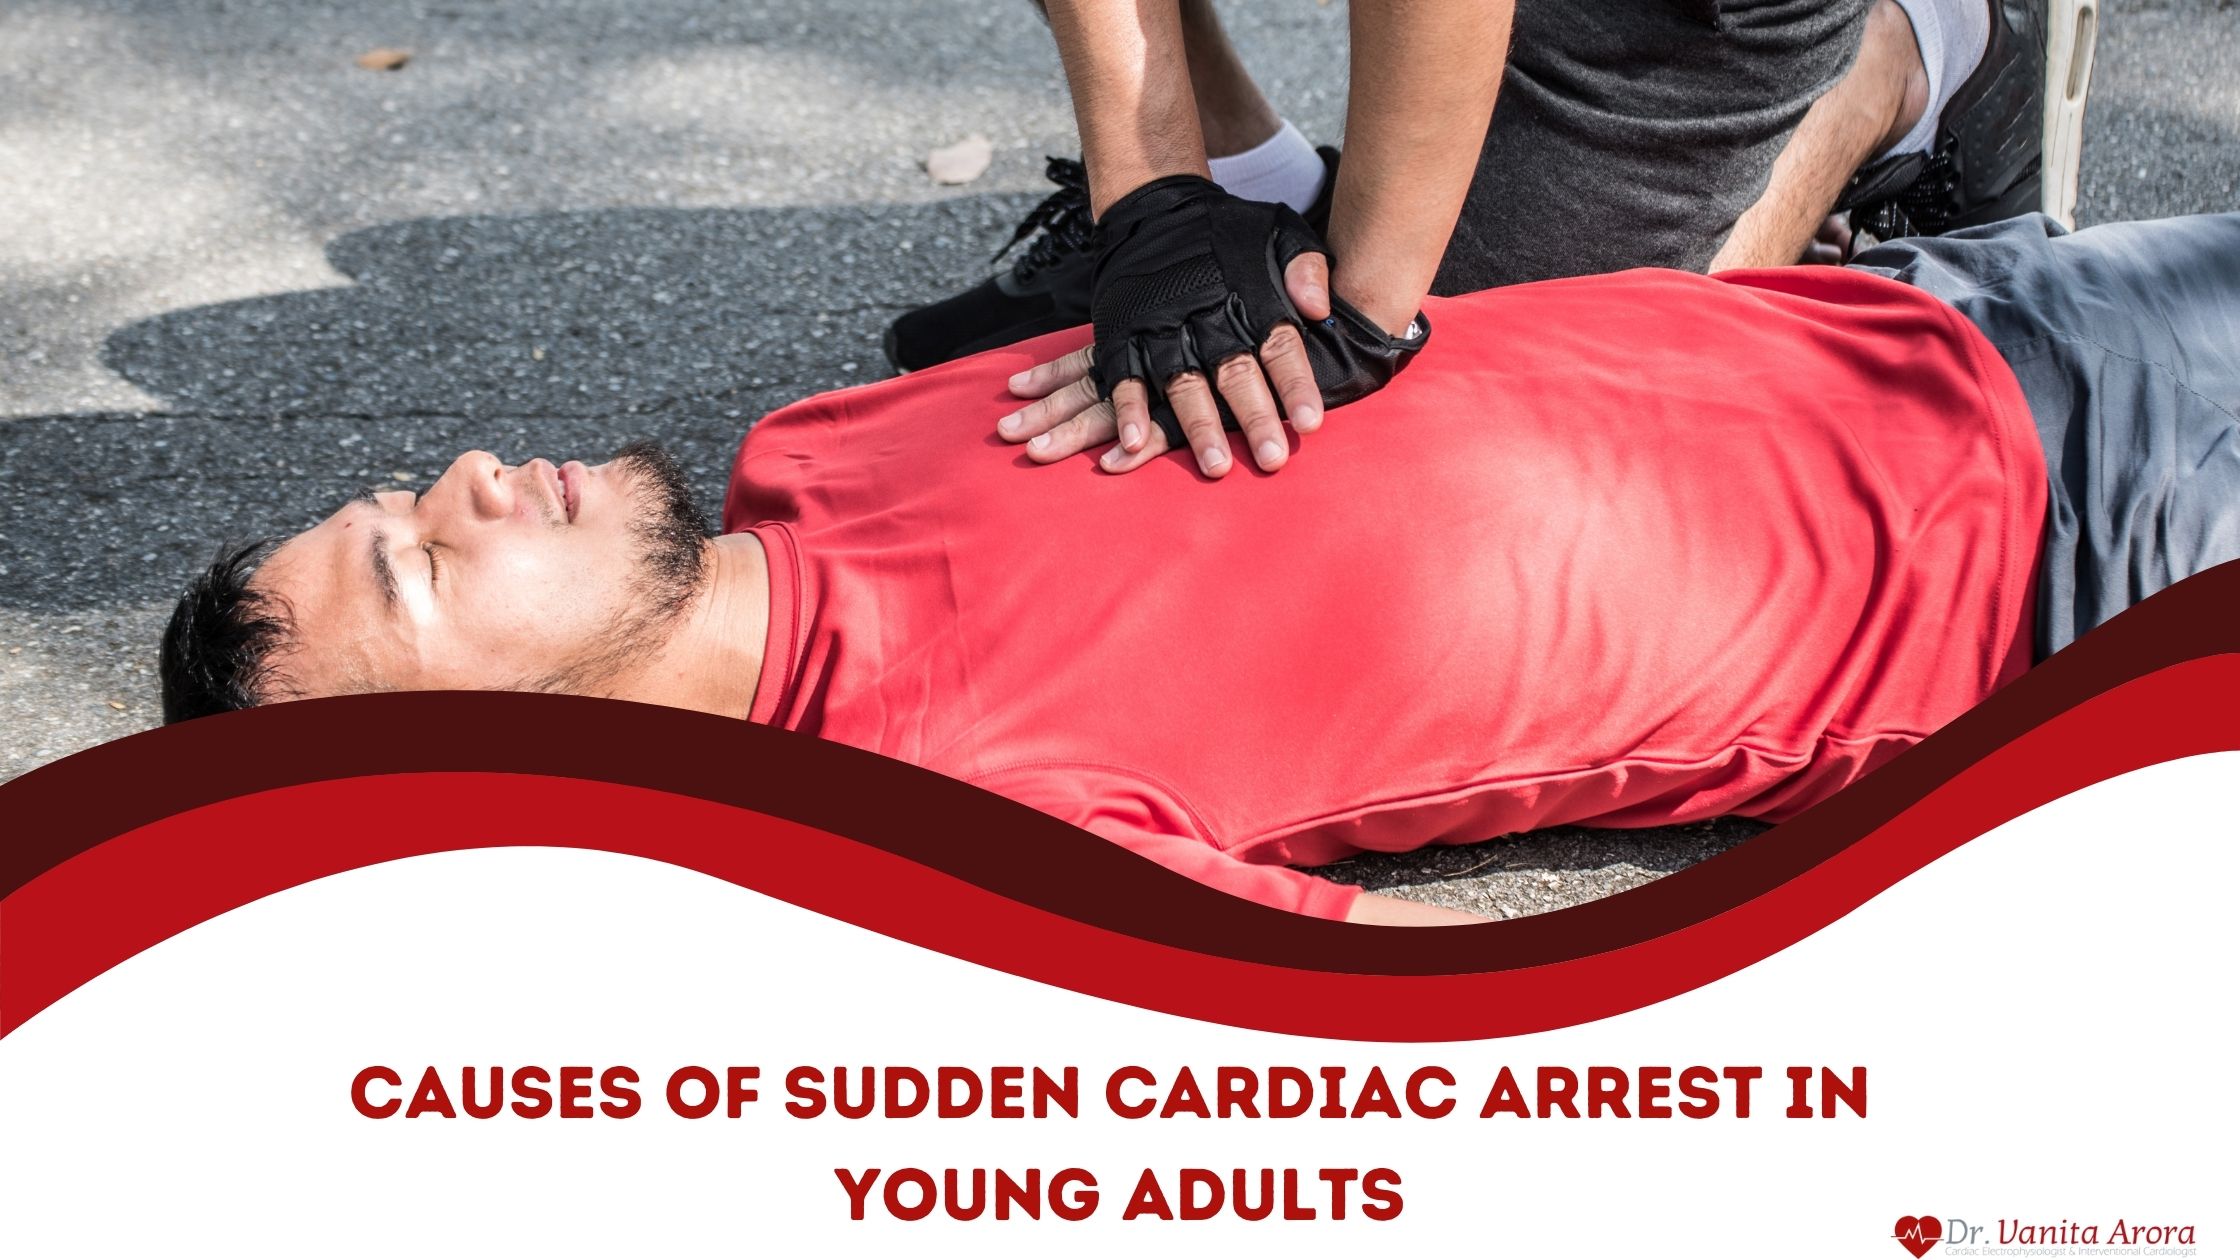 Causes of Sudden Cardiac Arrest in Young Adults